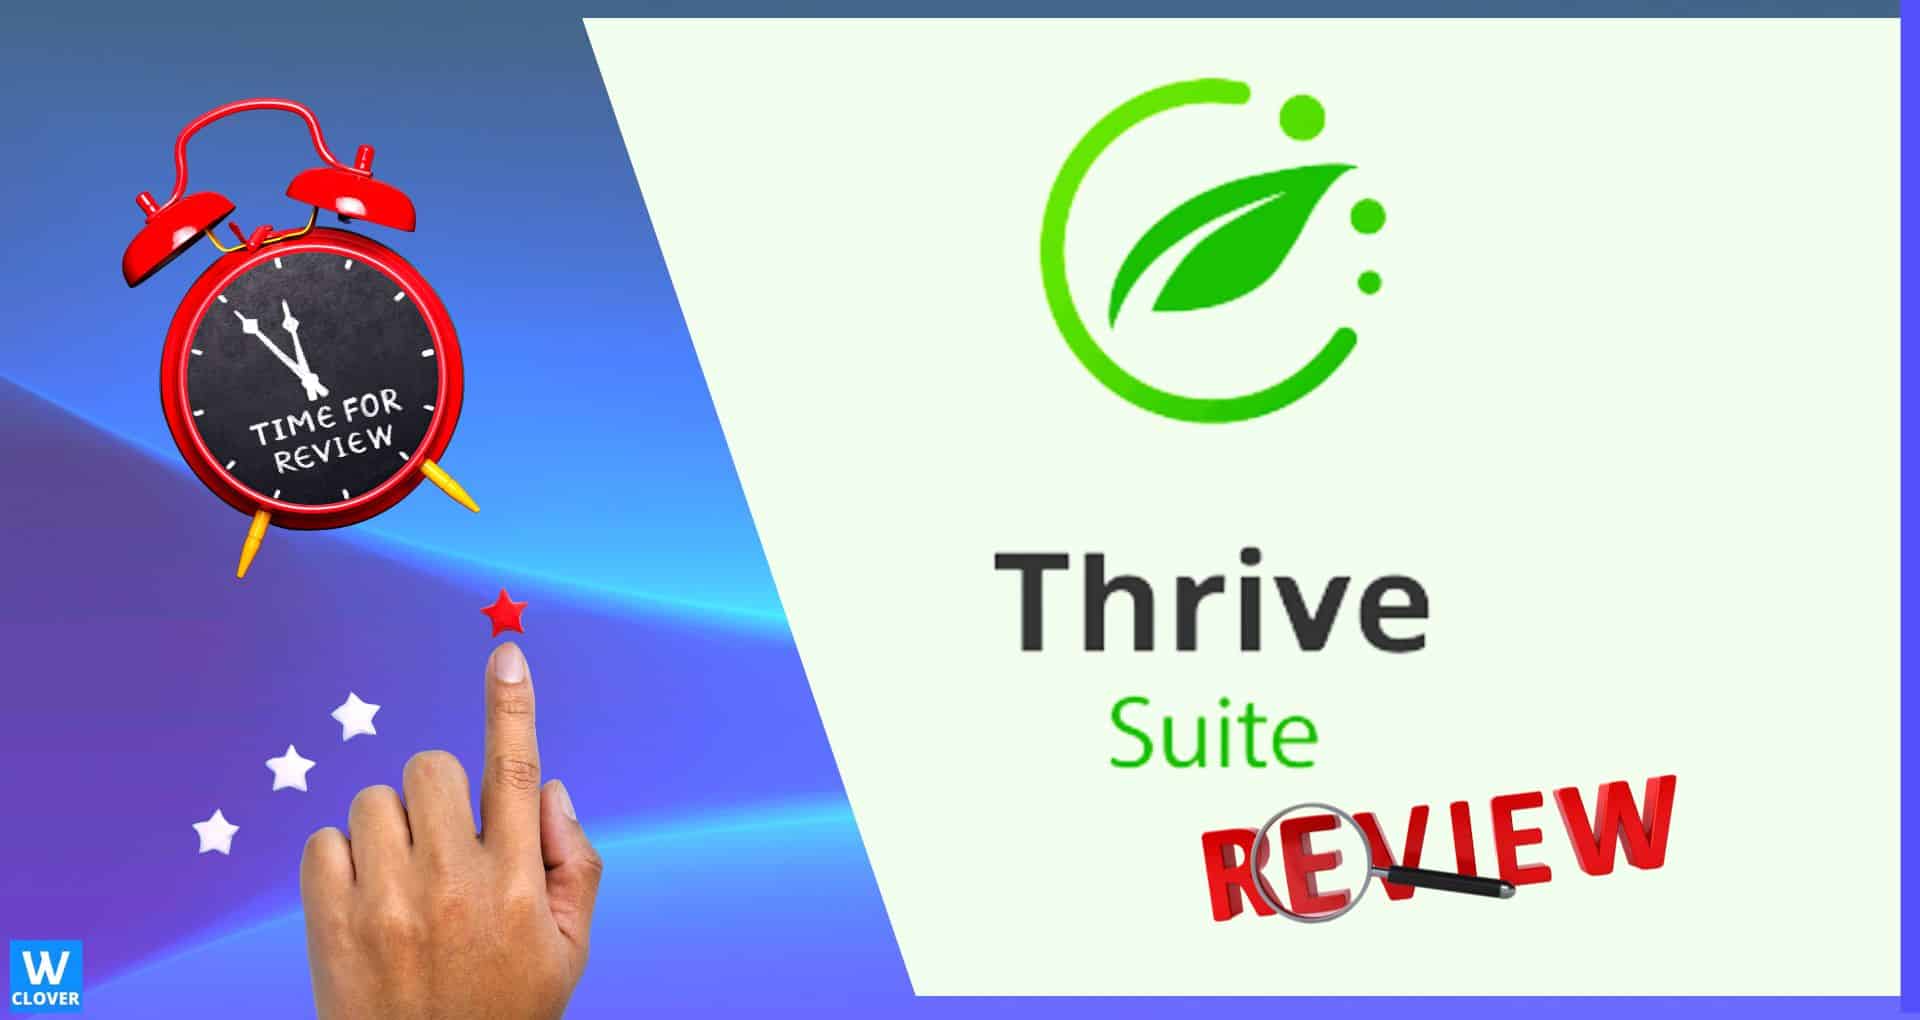 thrive suite review graphics of thrive logo clock and finger points to a star on green-blue background